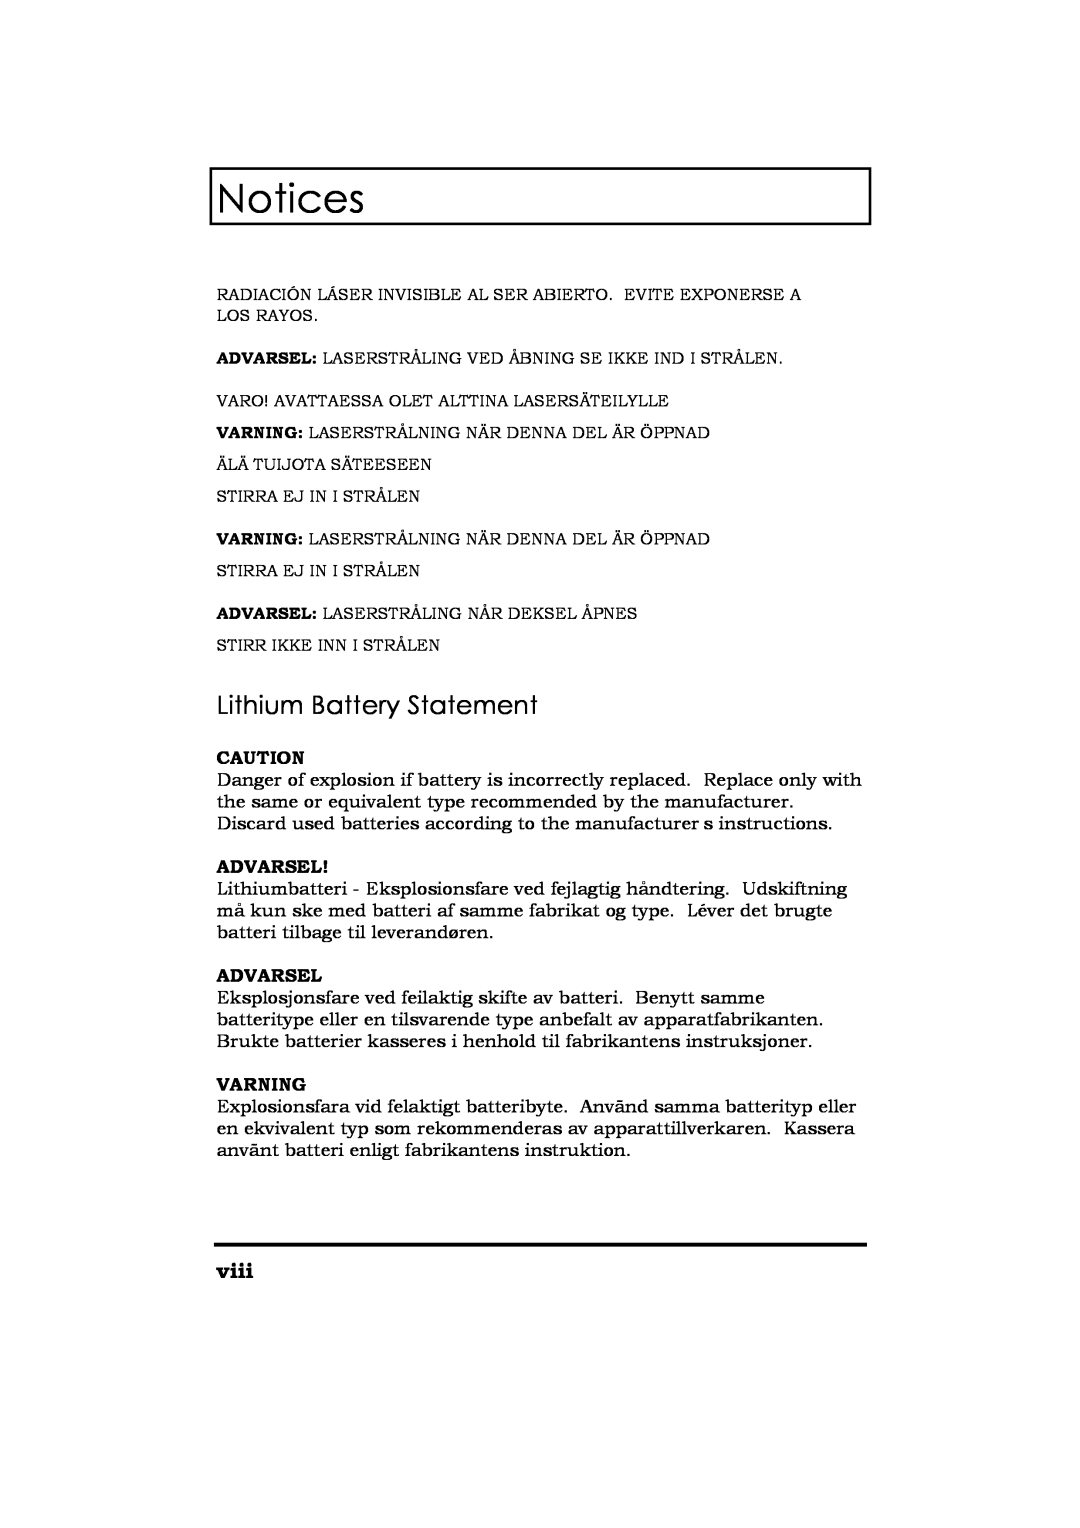 Acer Extensa 365 manual Lithium Battery Statement, viii, Notices, Advarsel, Varning 